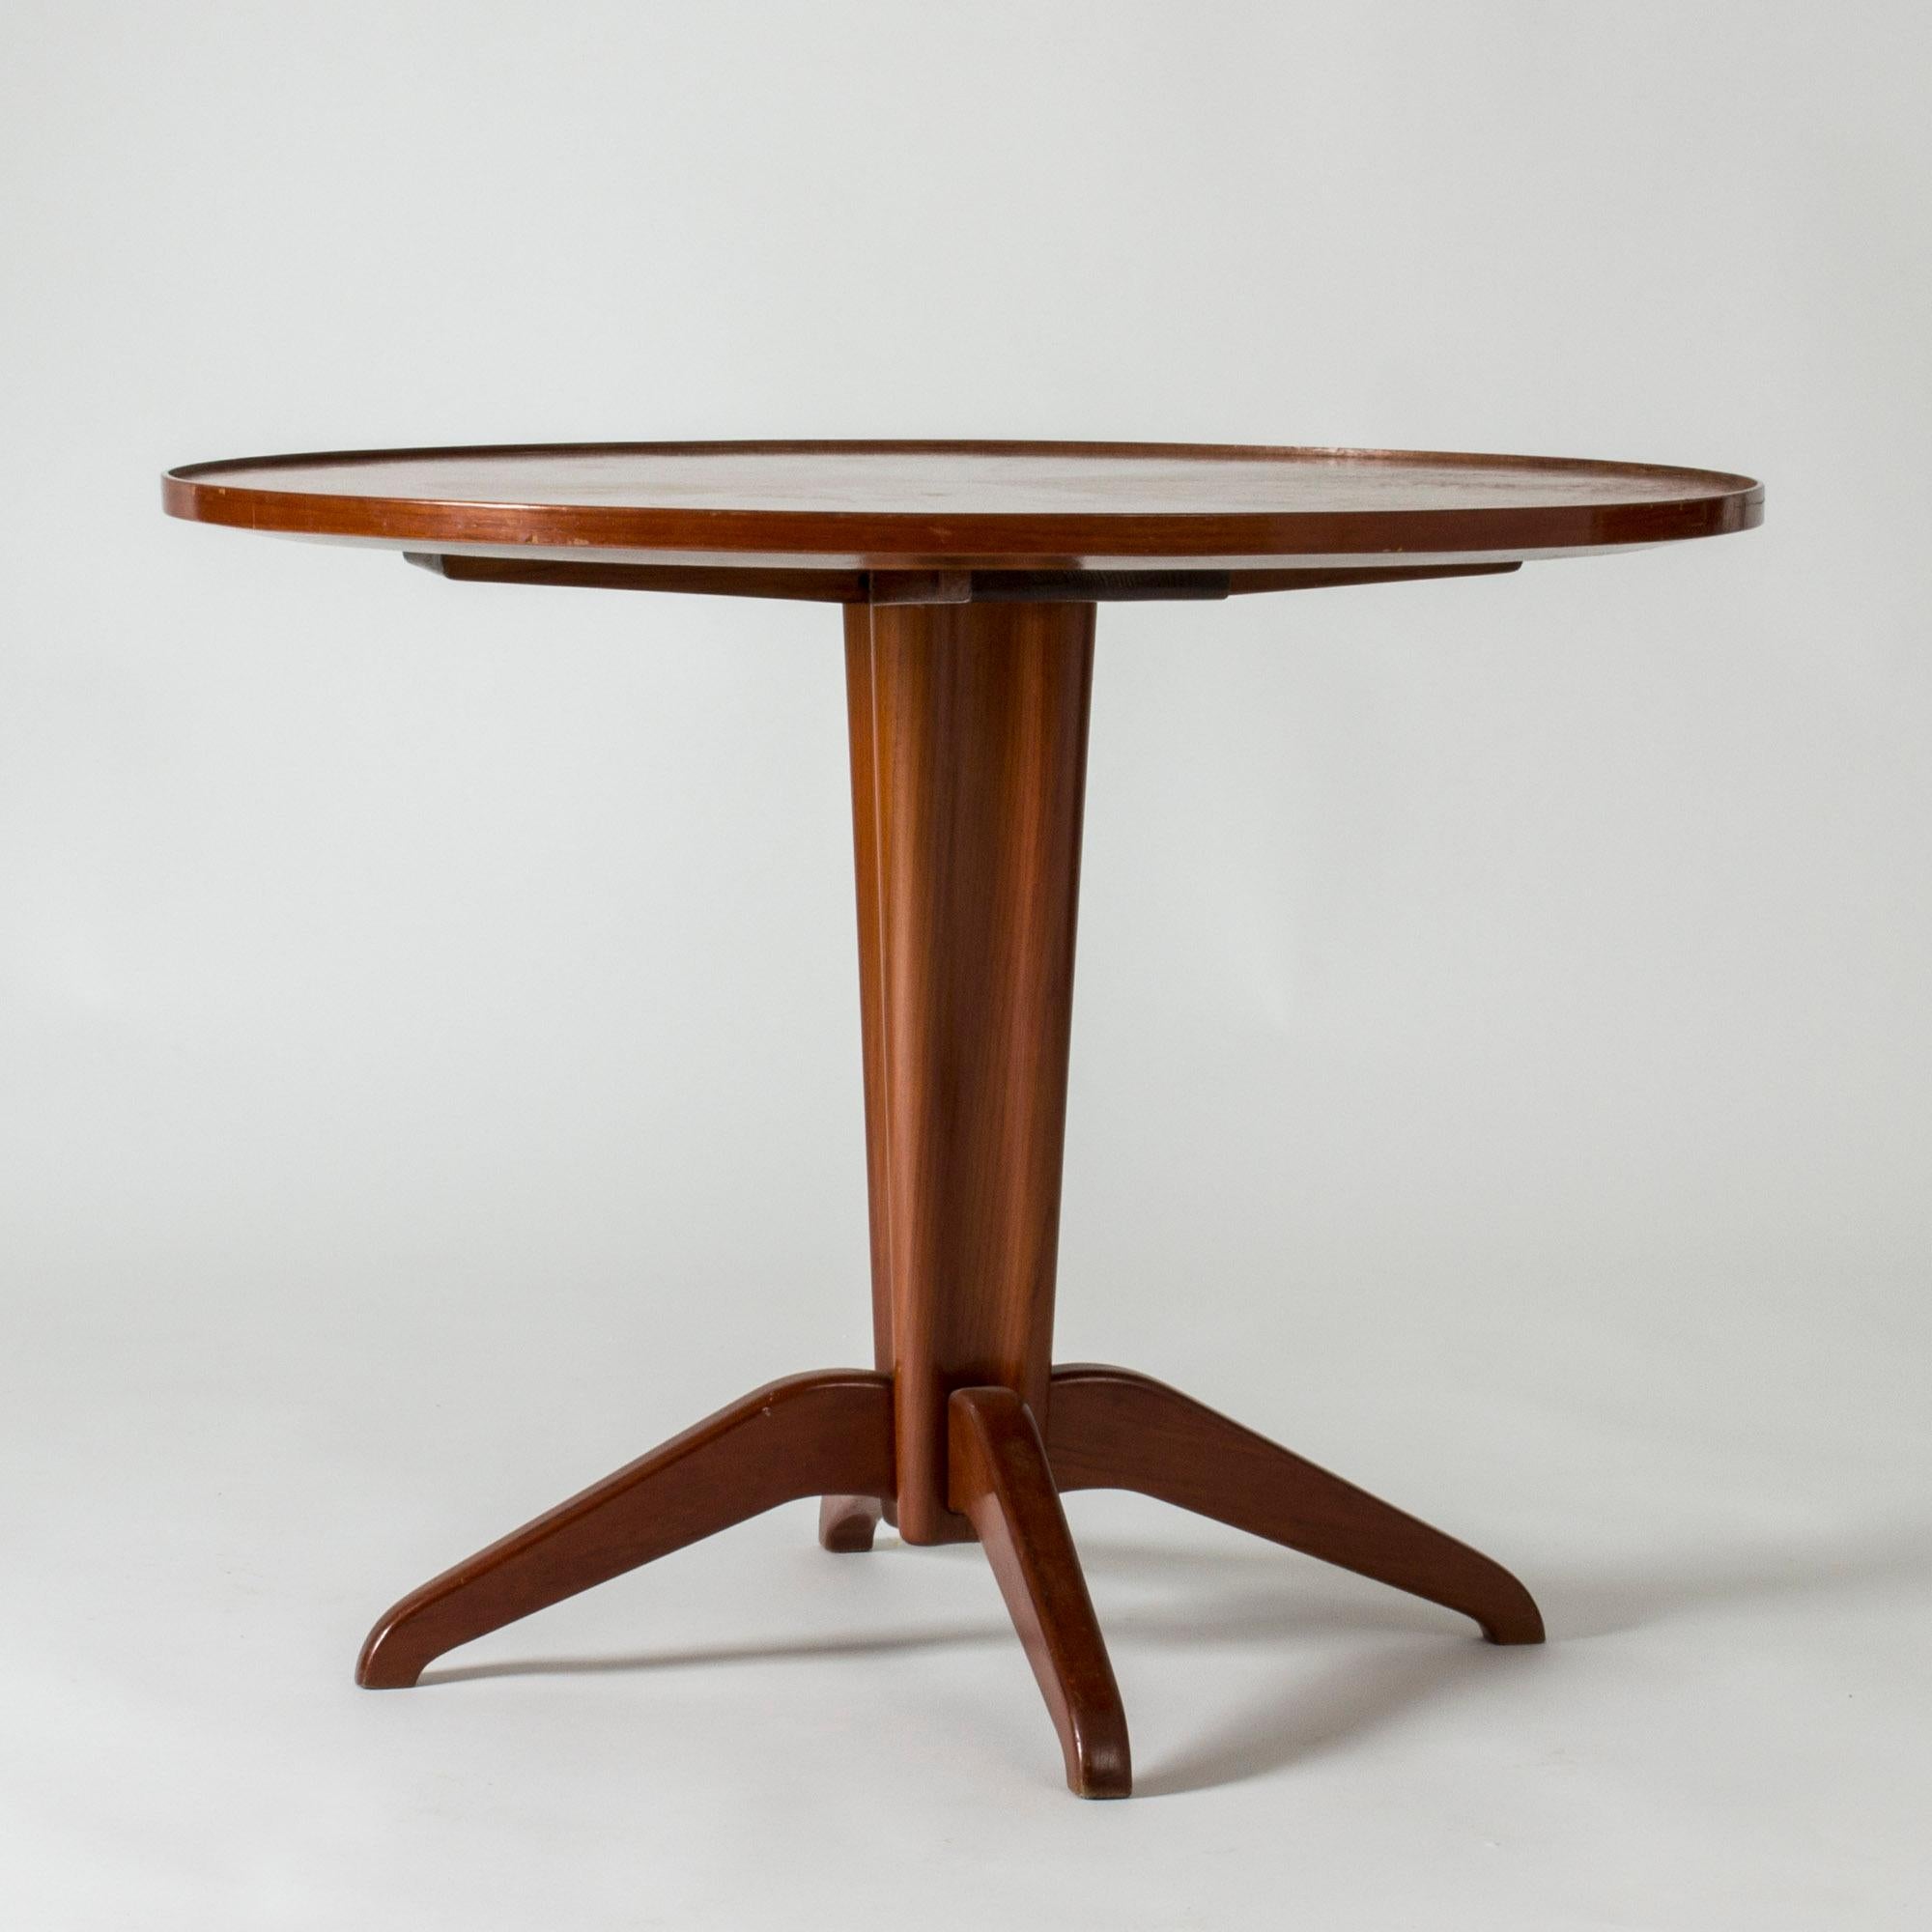 Beautiful round coffee or side table by Oscar Nilsson, in a neat size and a luxurious modernist expression. Warm wood color.